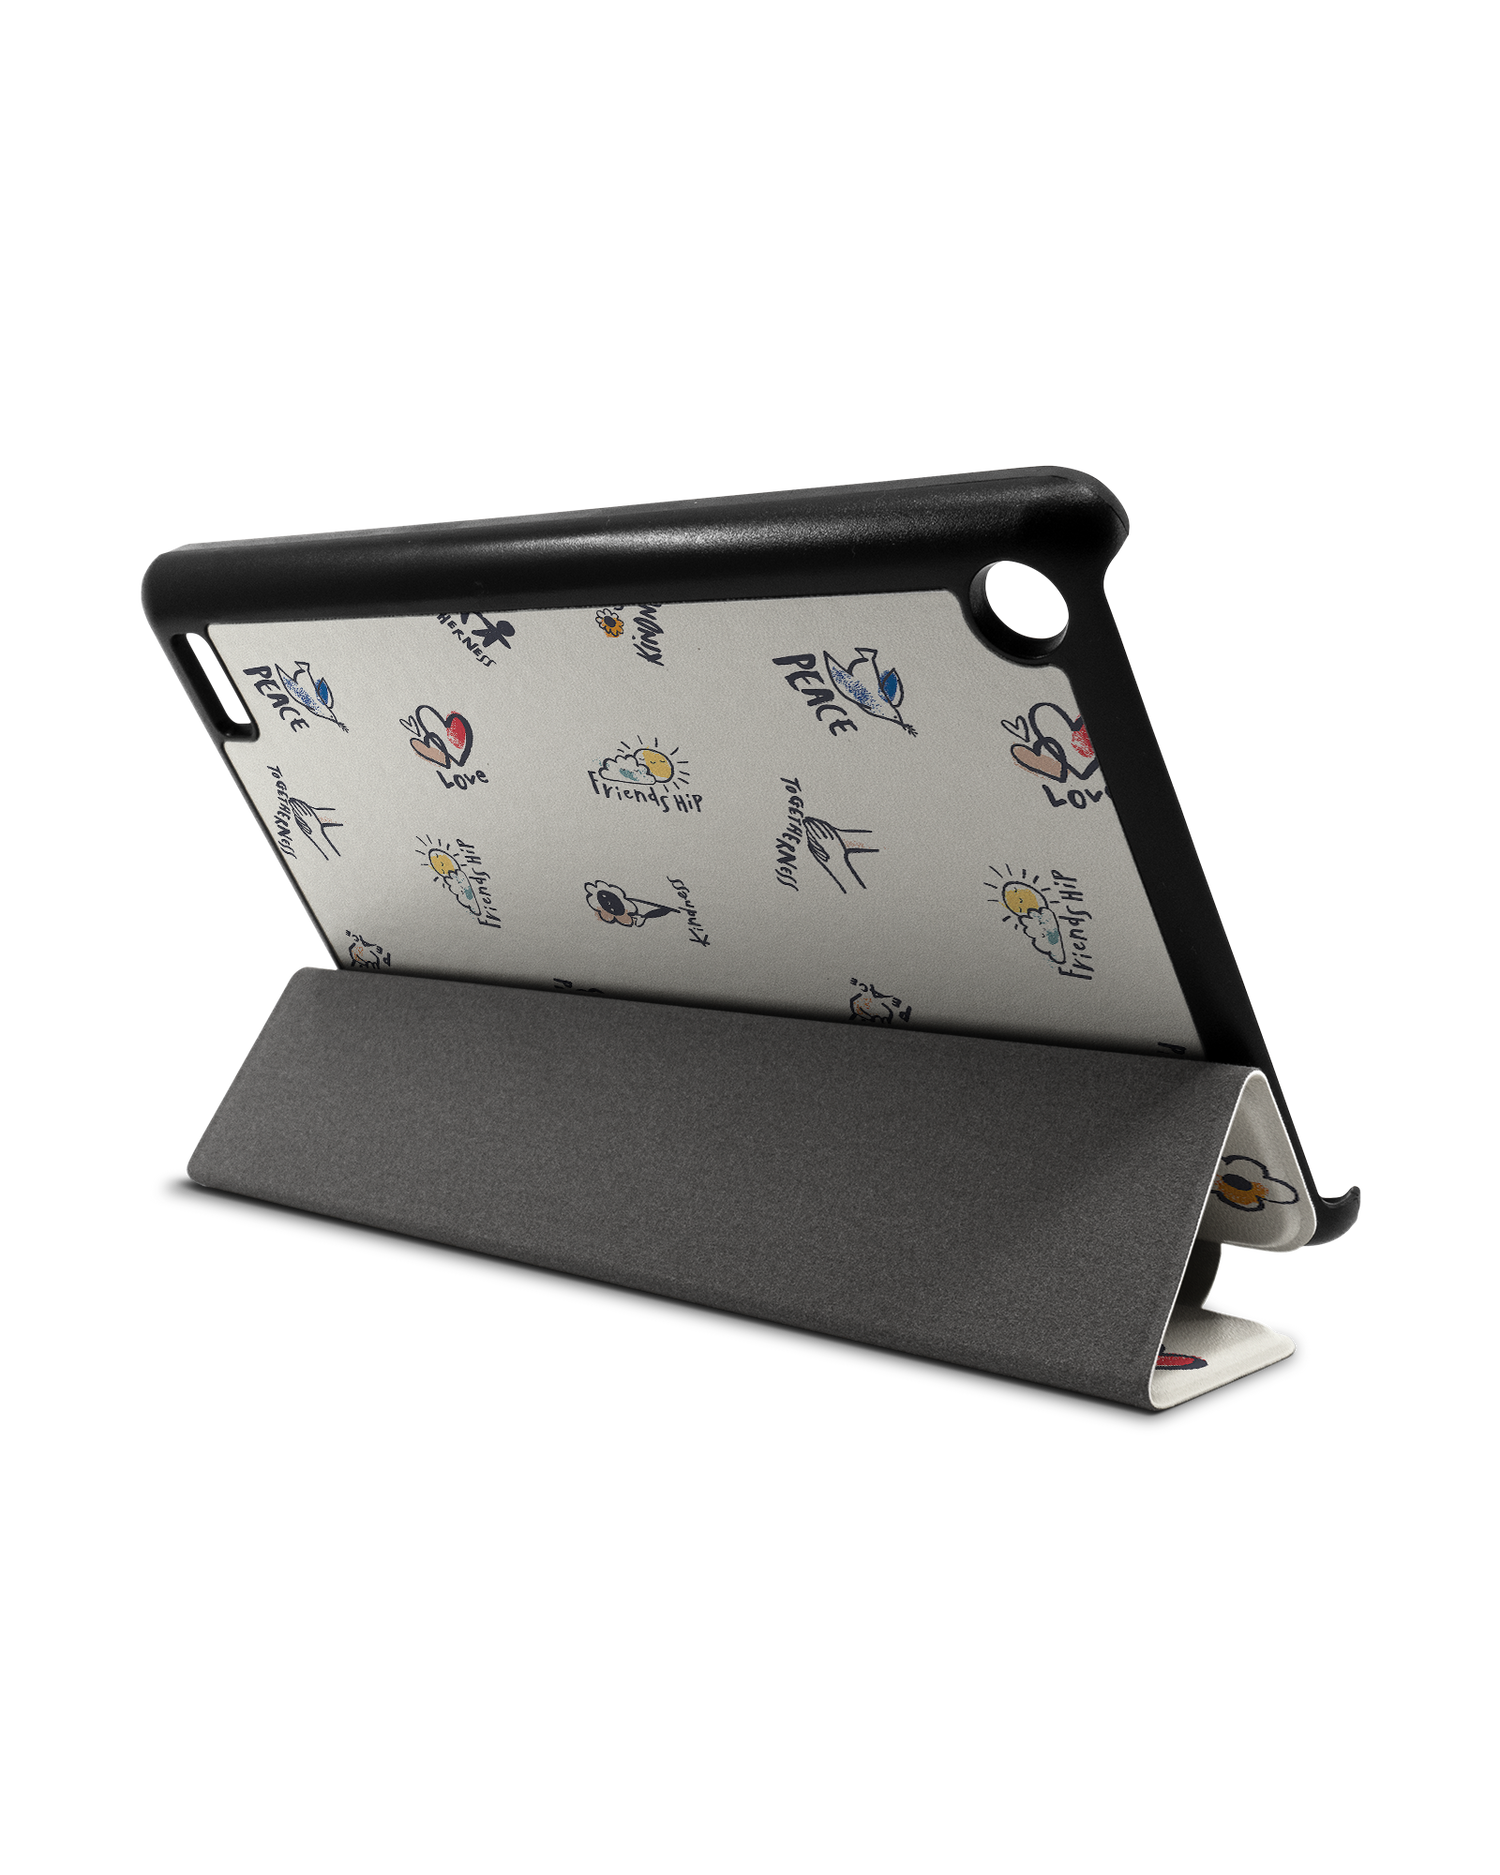 Peace And Love Tablet Smart Case for Amazon Fire 7: Used as Stand